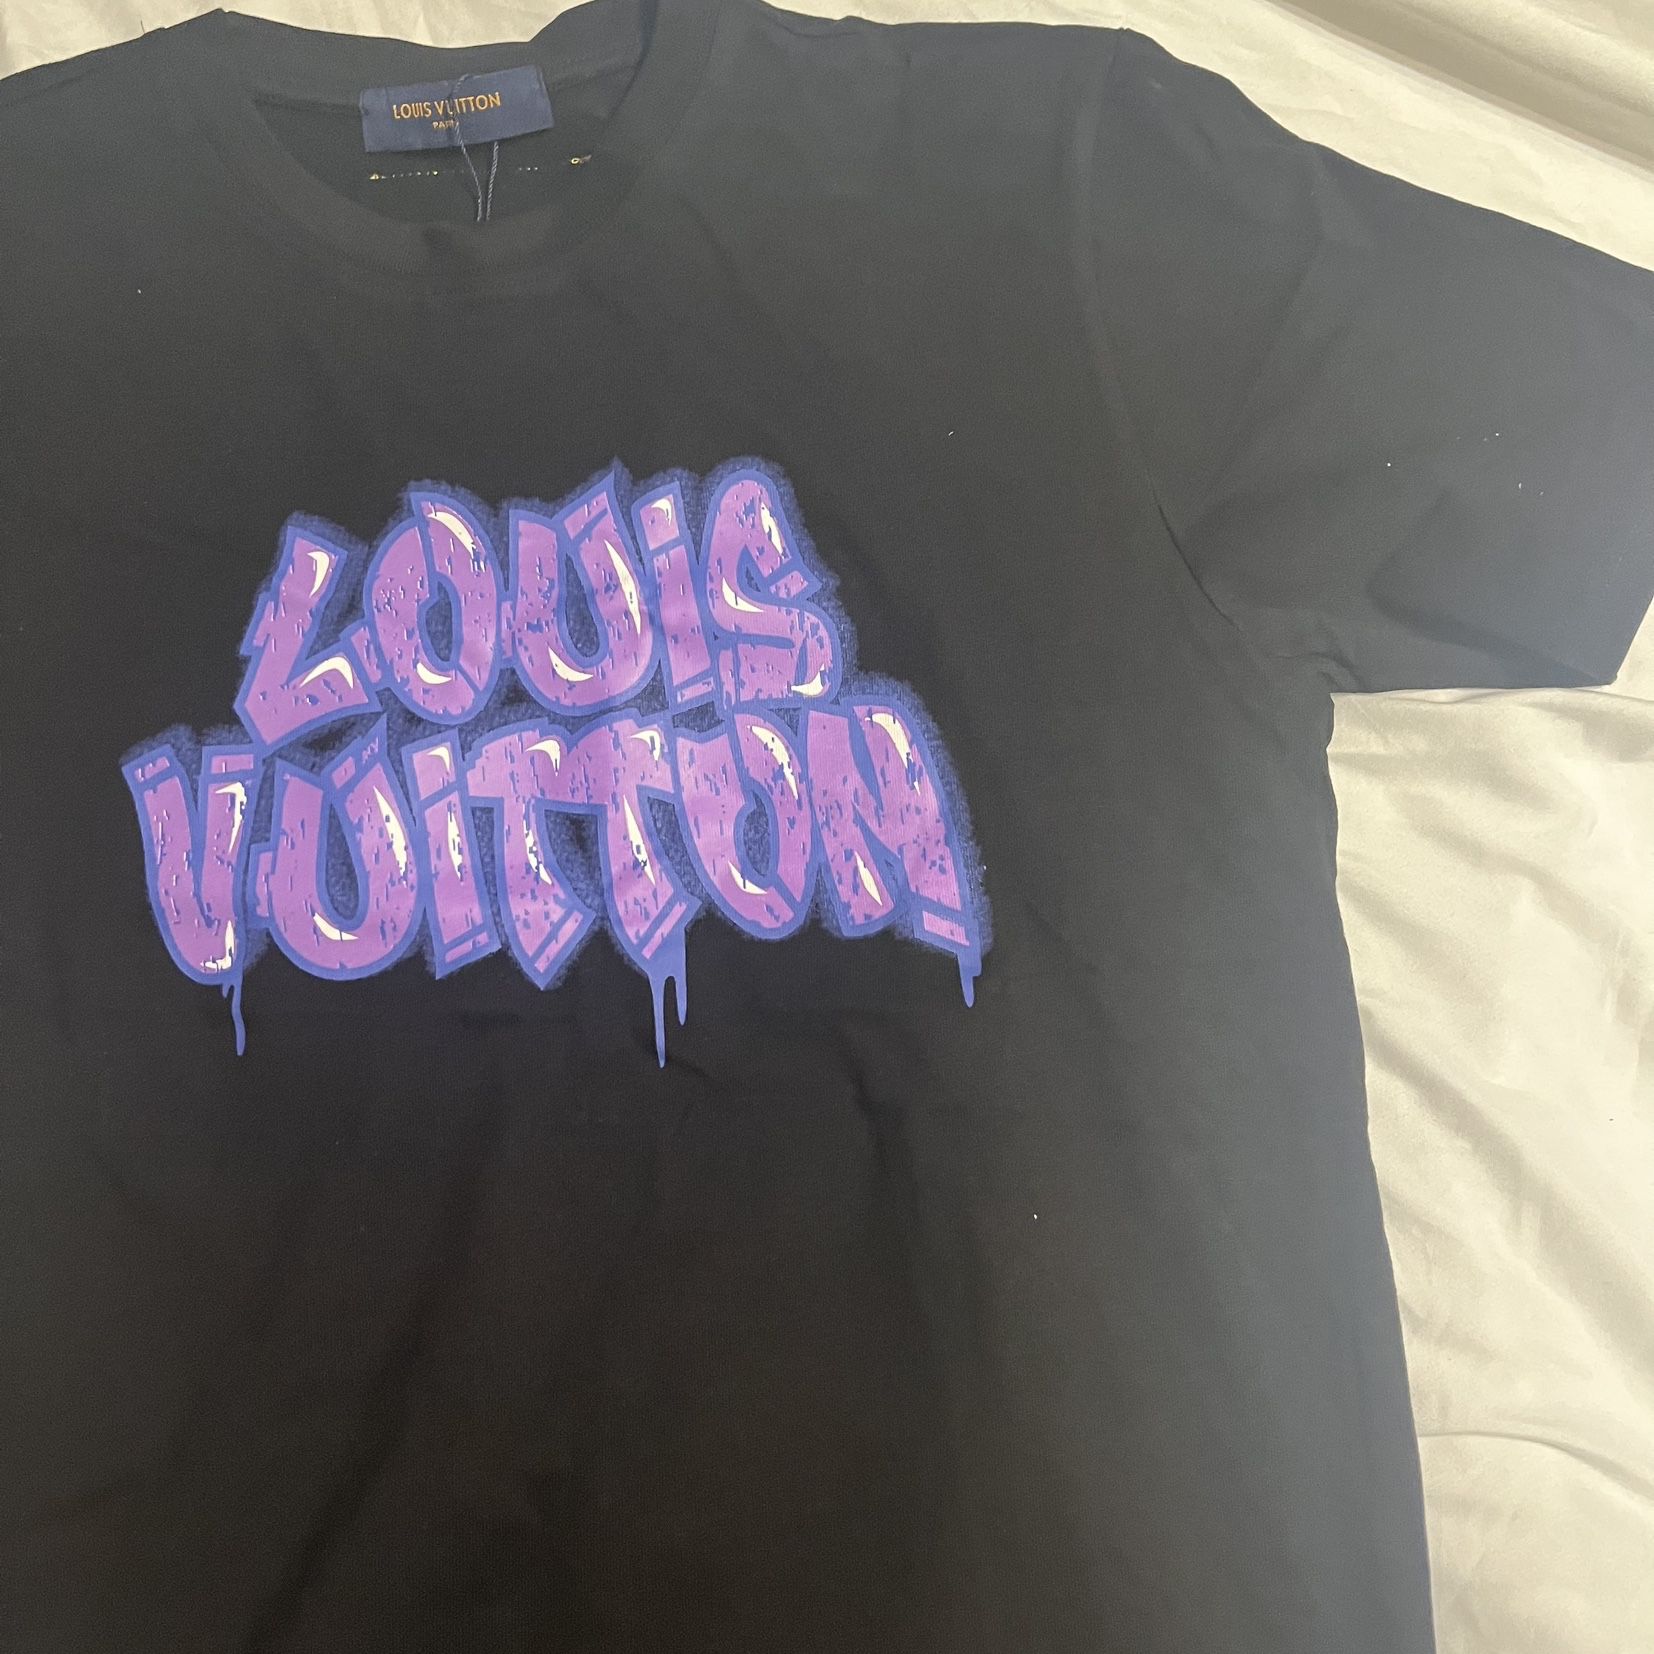 Black Louis Vuitton Tee LV T Shirt for Sale in Salem, MA - OfferUp